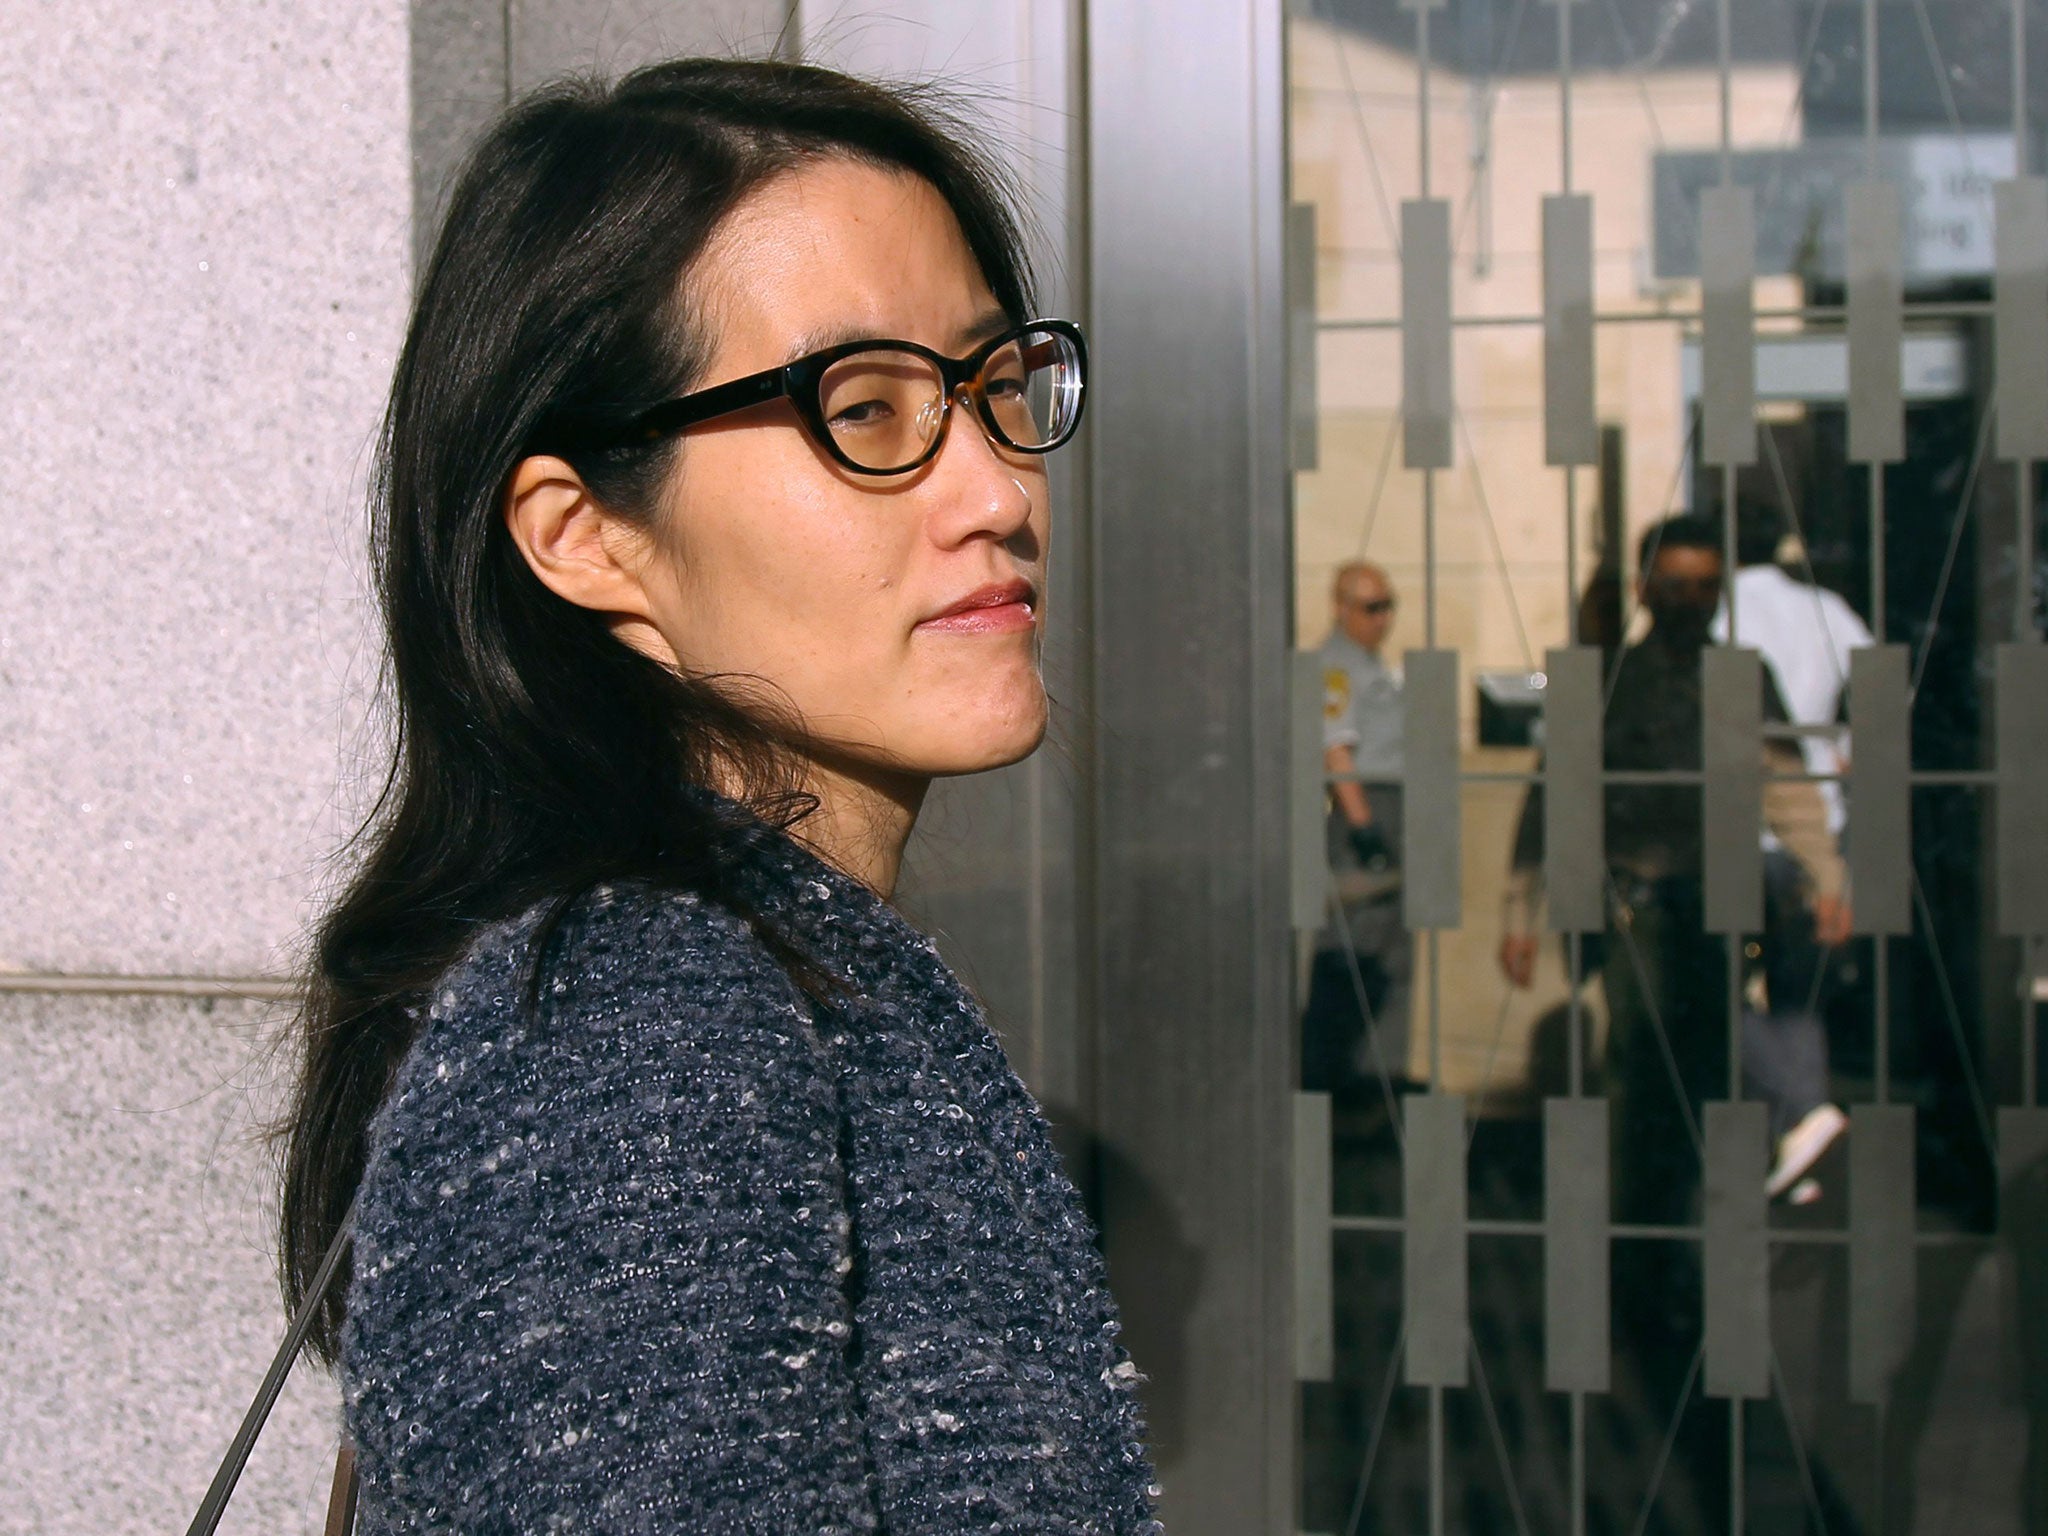 Ellen Pao claims she was excluded from meetings because ‘women kill the buzz’